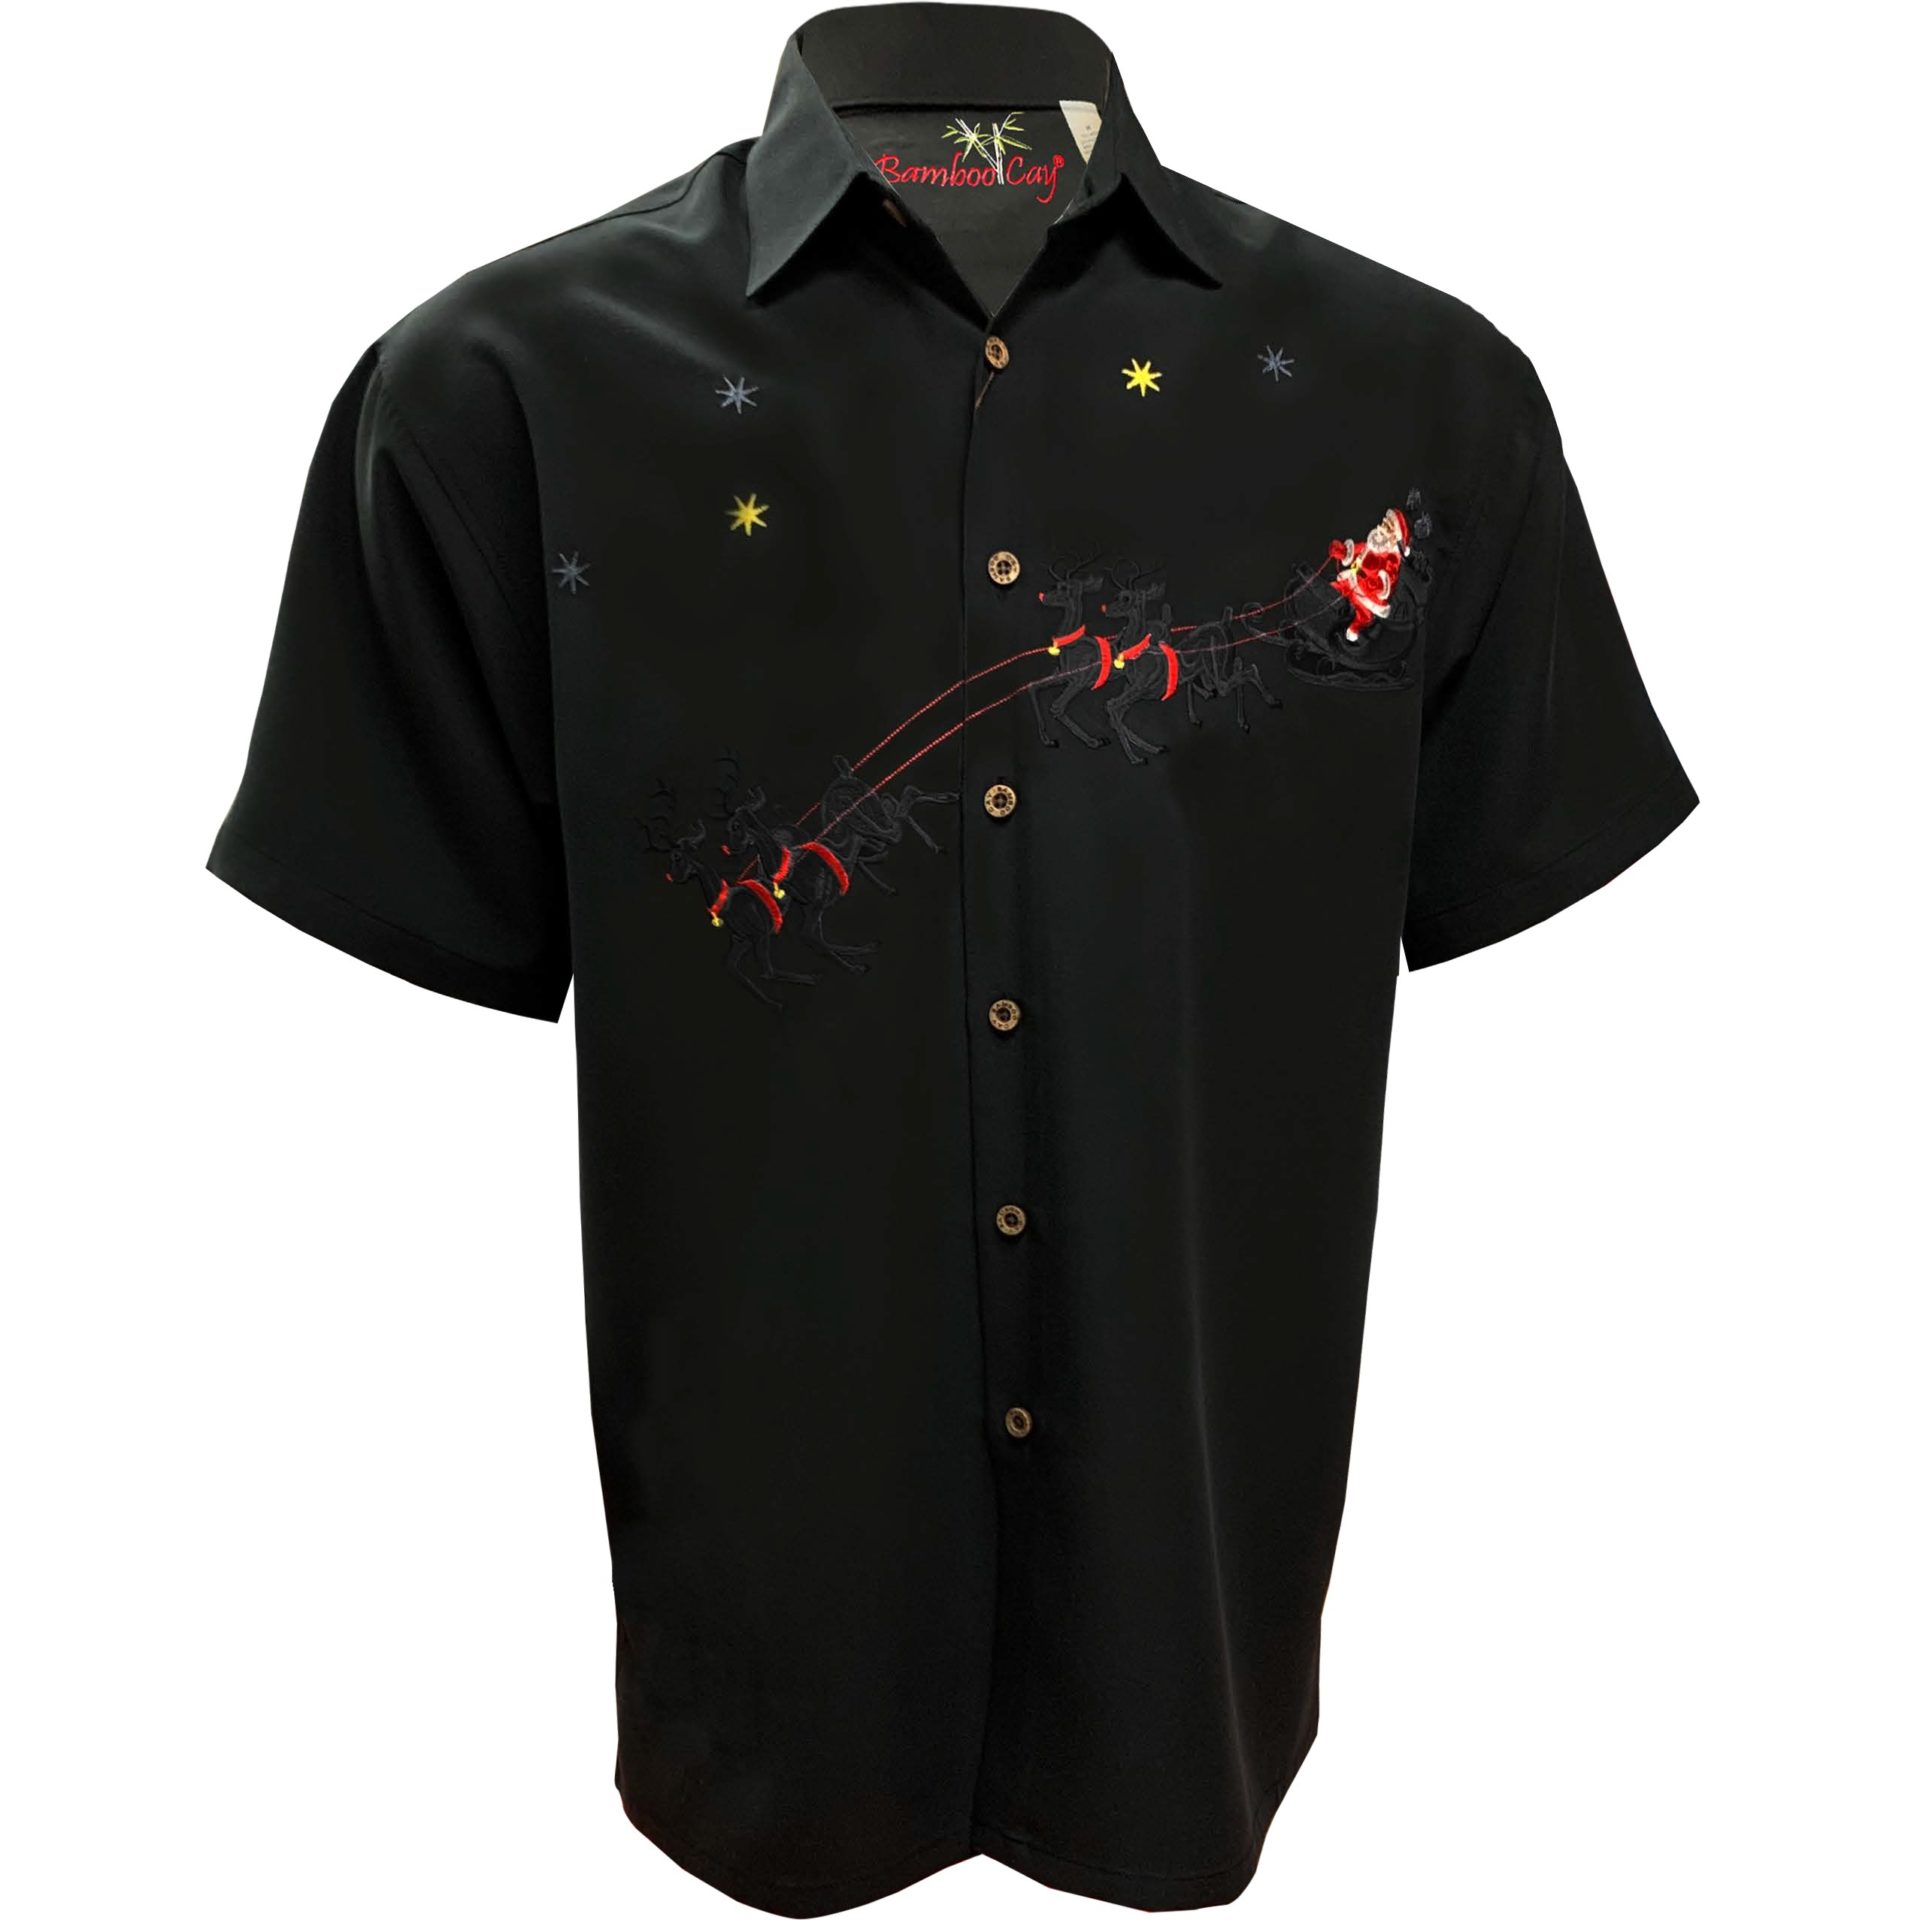 Bamboo-Cay-Mens-Shirt-Merry-Christmas-Happy-New-Year-black-front-view